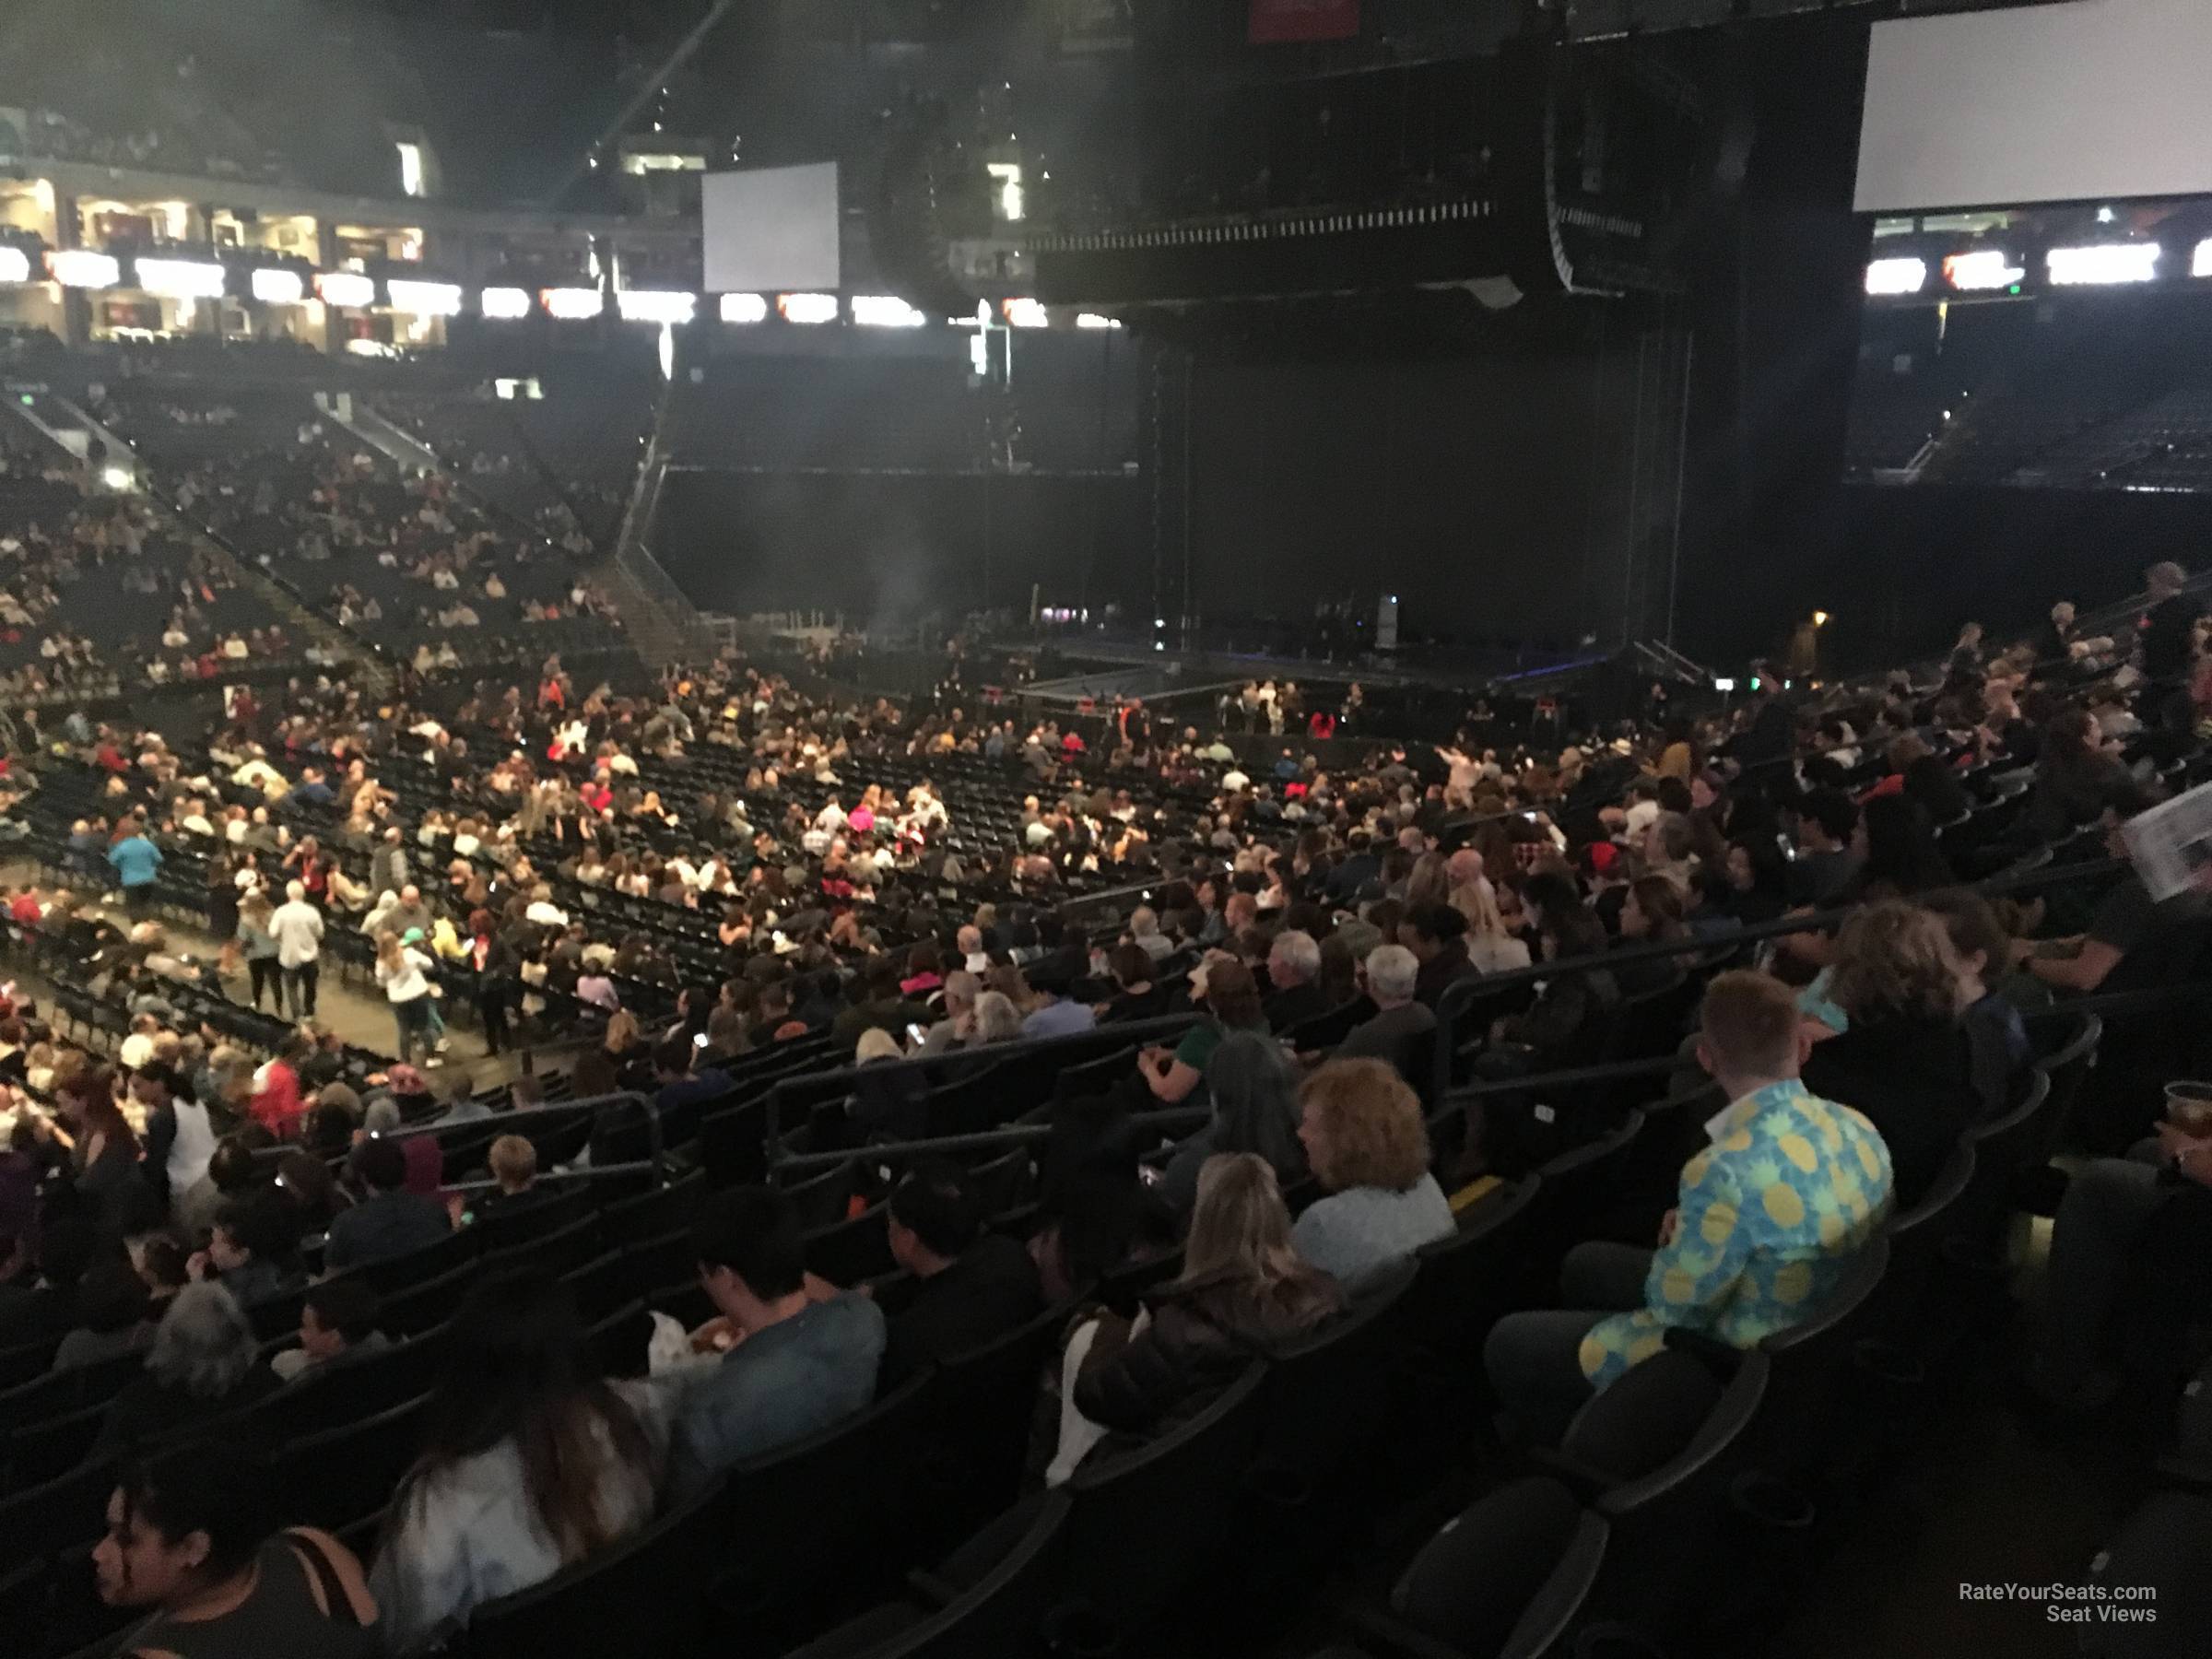 section 102, row 16 seat view  - oakland arena